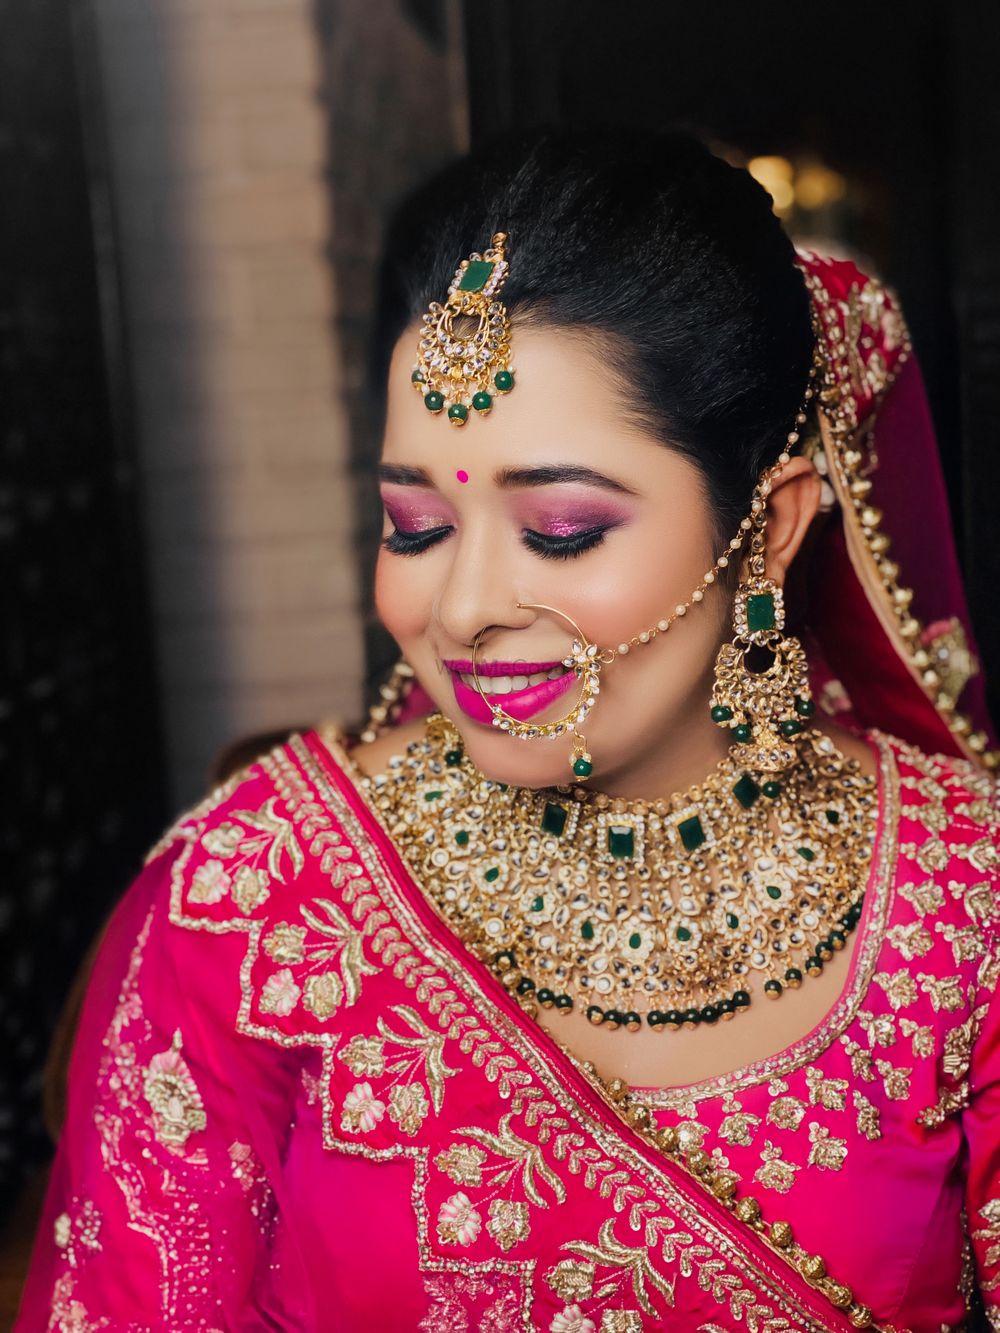 Photo From BRIDAL MAKE UP BY MANNU - By Styles Studio